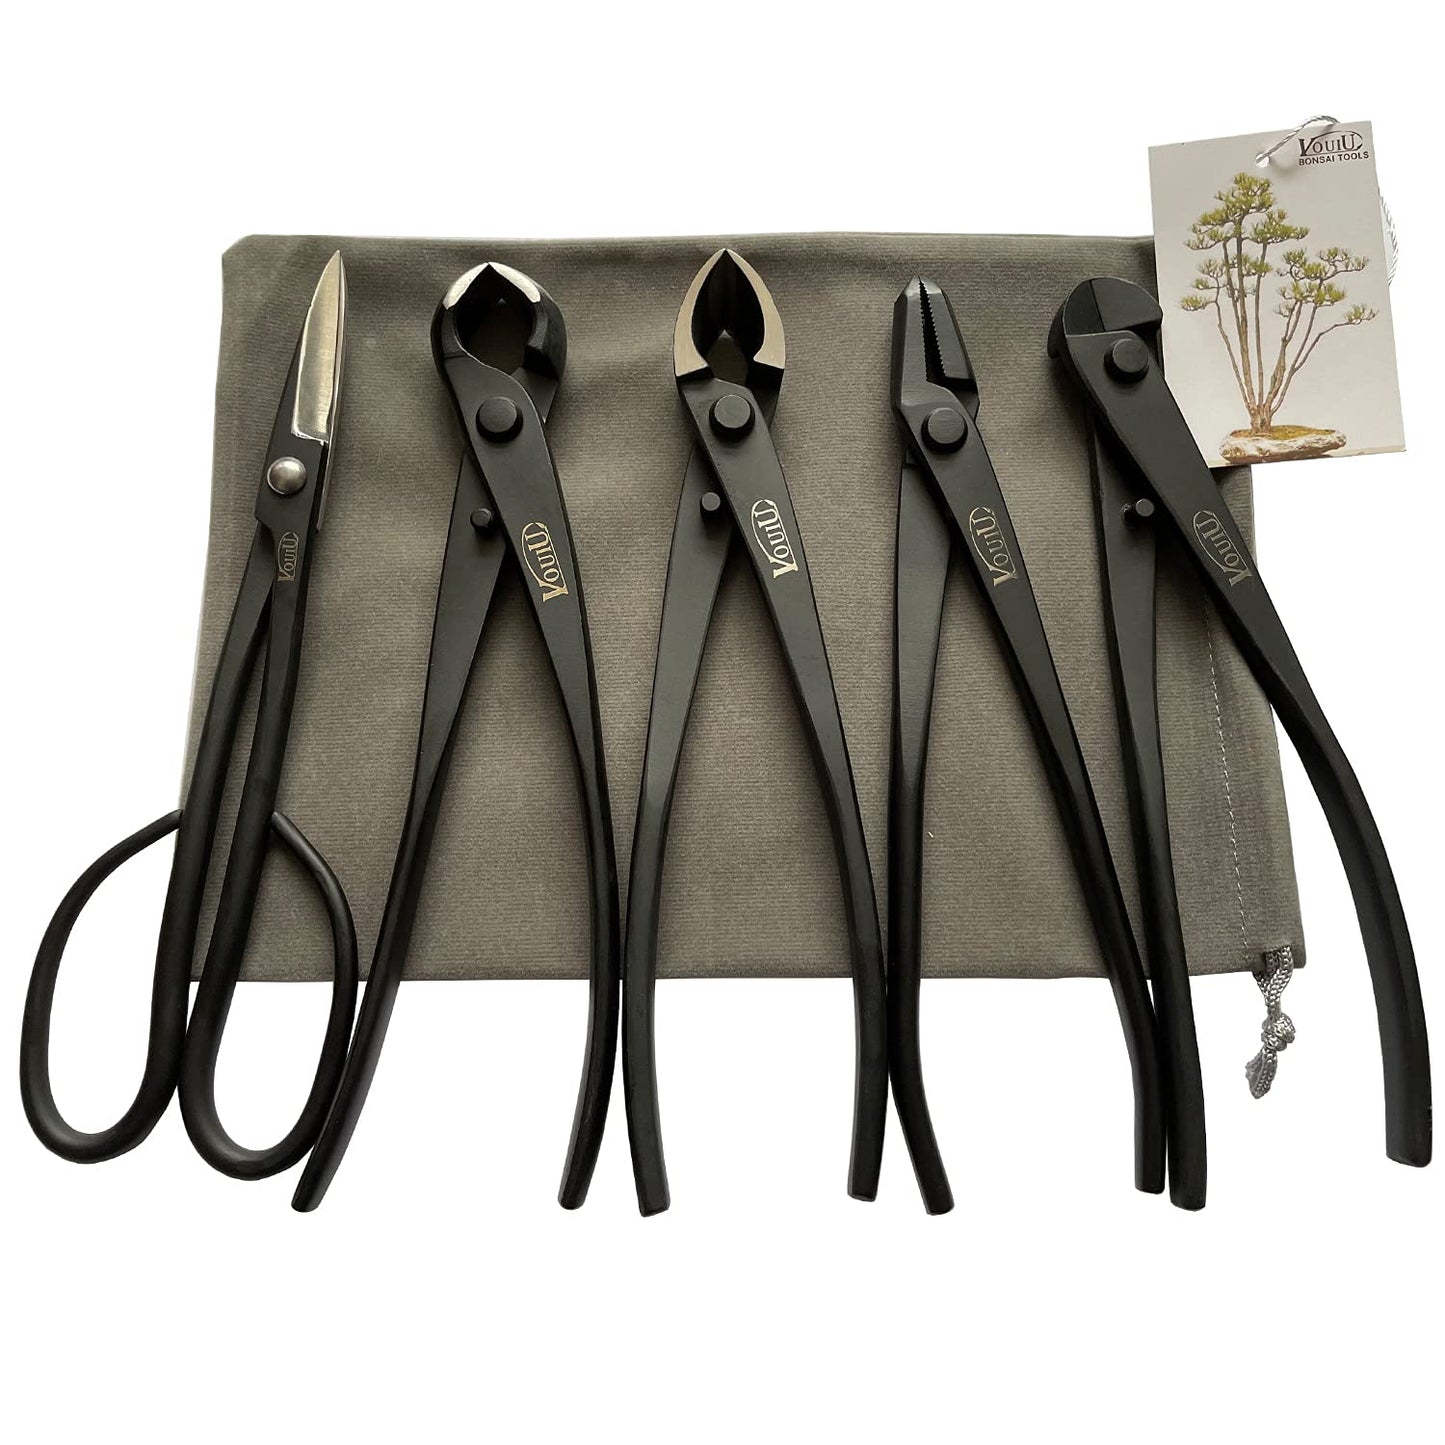 5-Piece Bonsai Tool Set - Coated Stainless Steel - Chinese Made